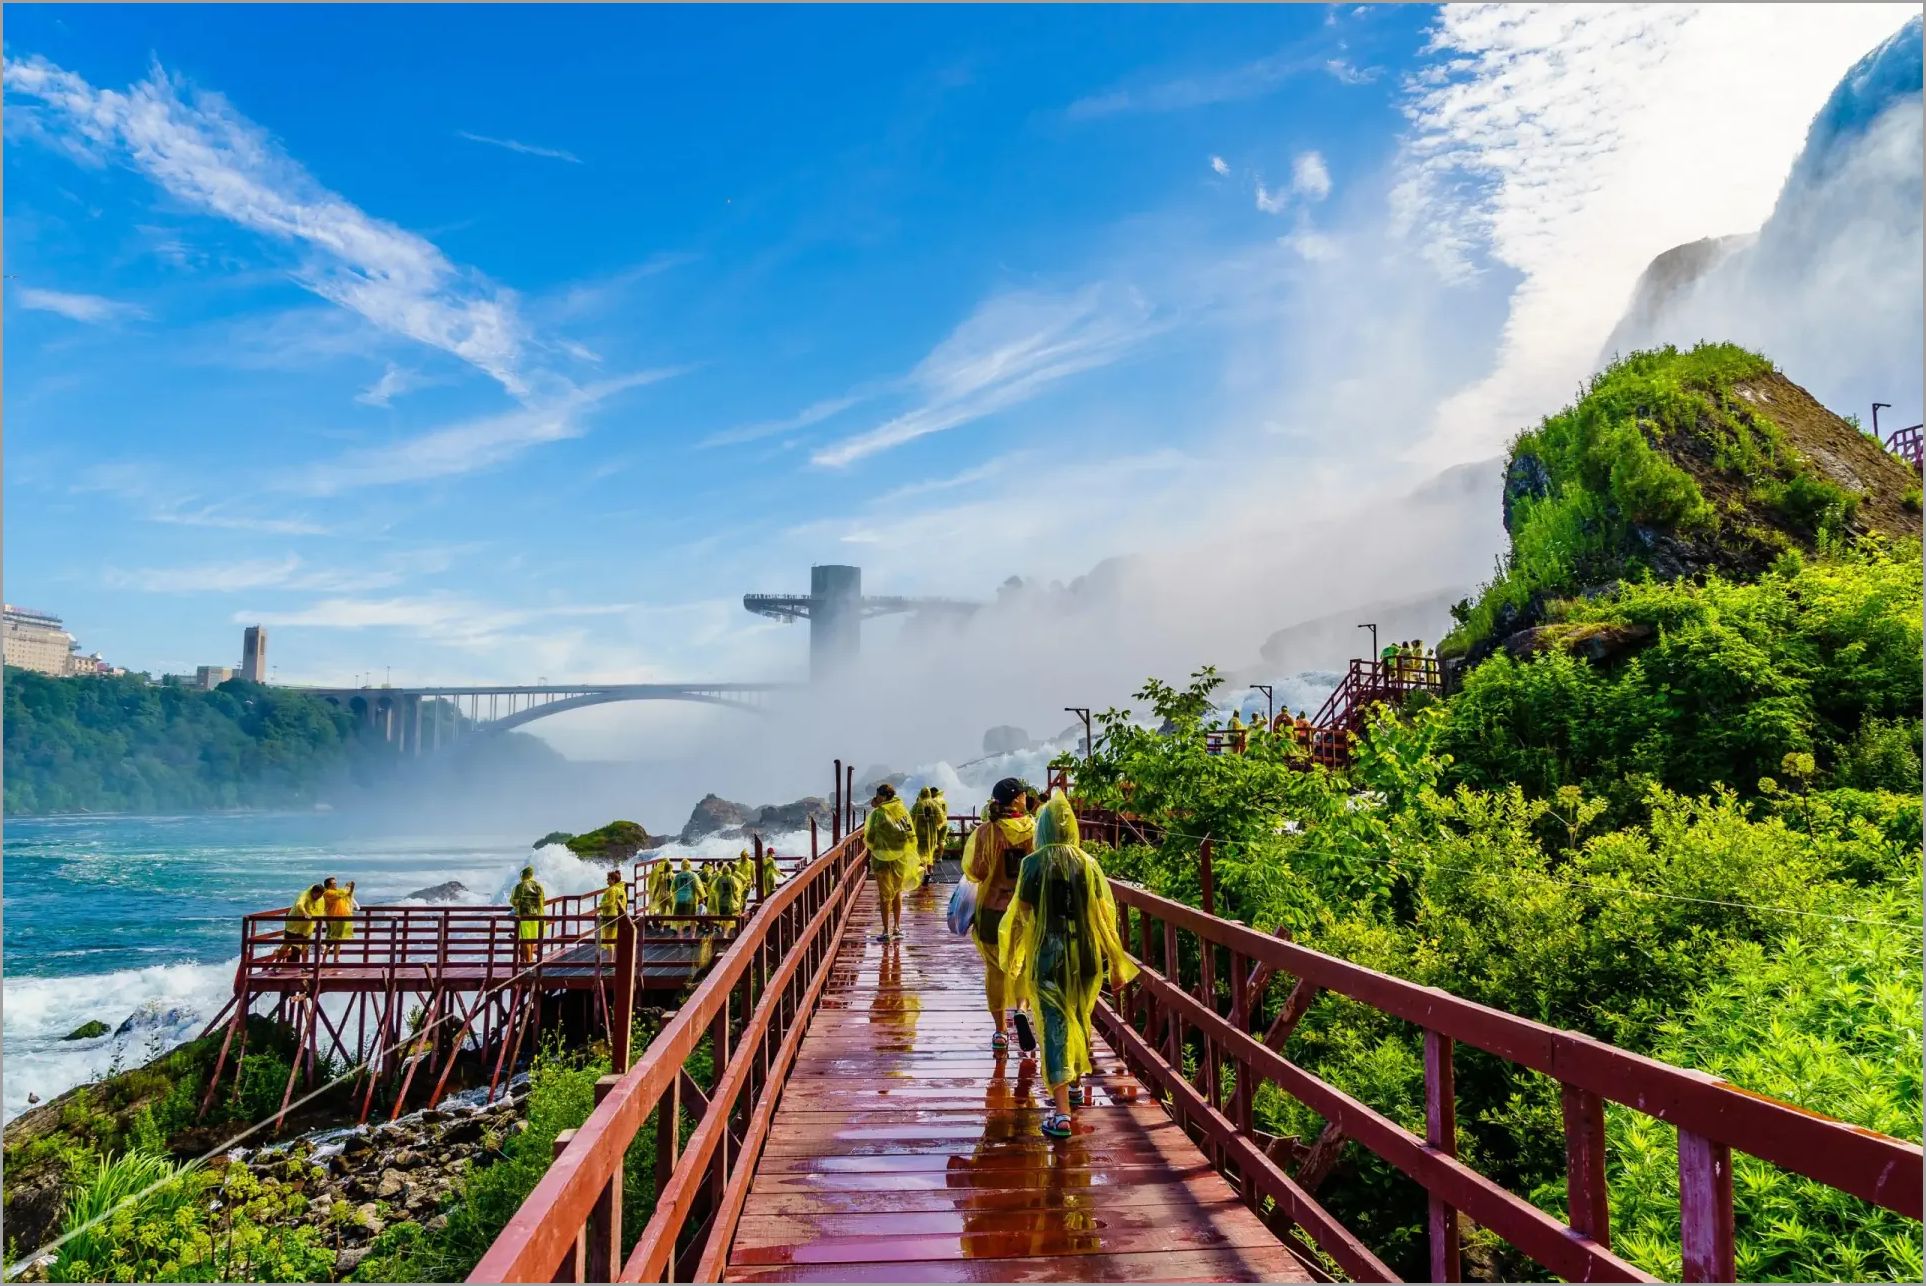 How Long Does It Take to Get to Niagara Falls Expert Travel Guide